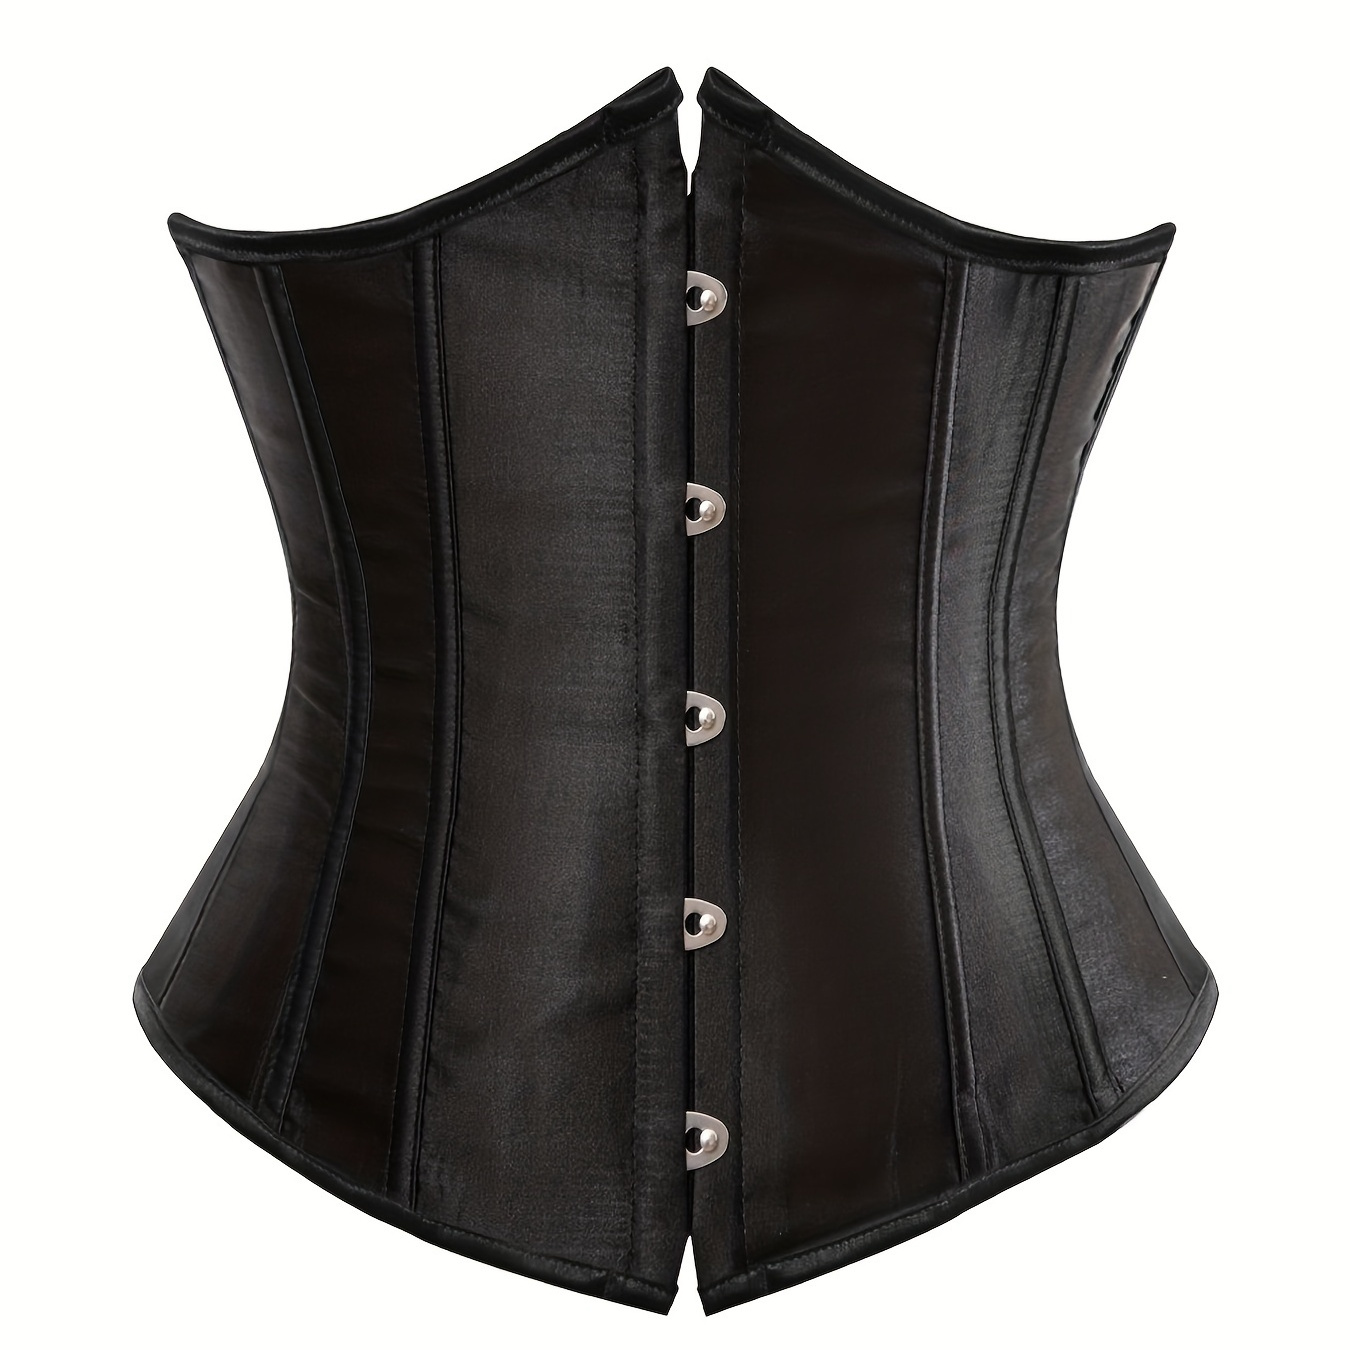 Women's Zipper Waist Trainer Corset, Tight Lace Up Bustier With